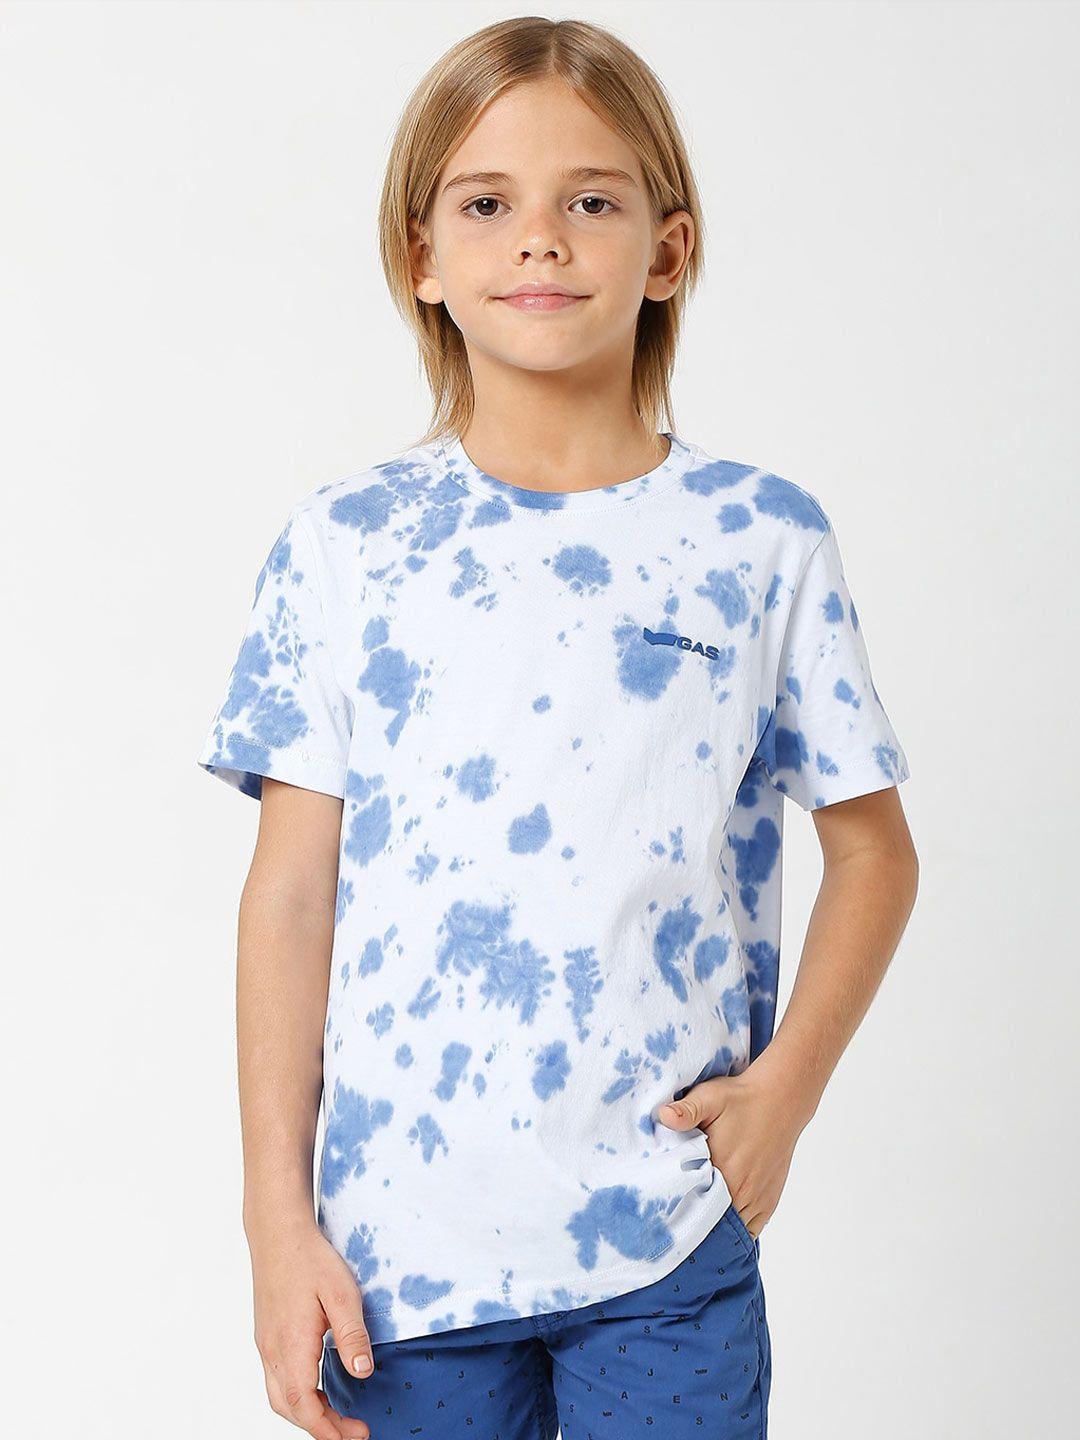 gas boys blue dyed extended sleeves raw edge slim fit t-shirt